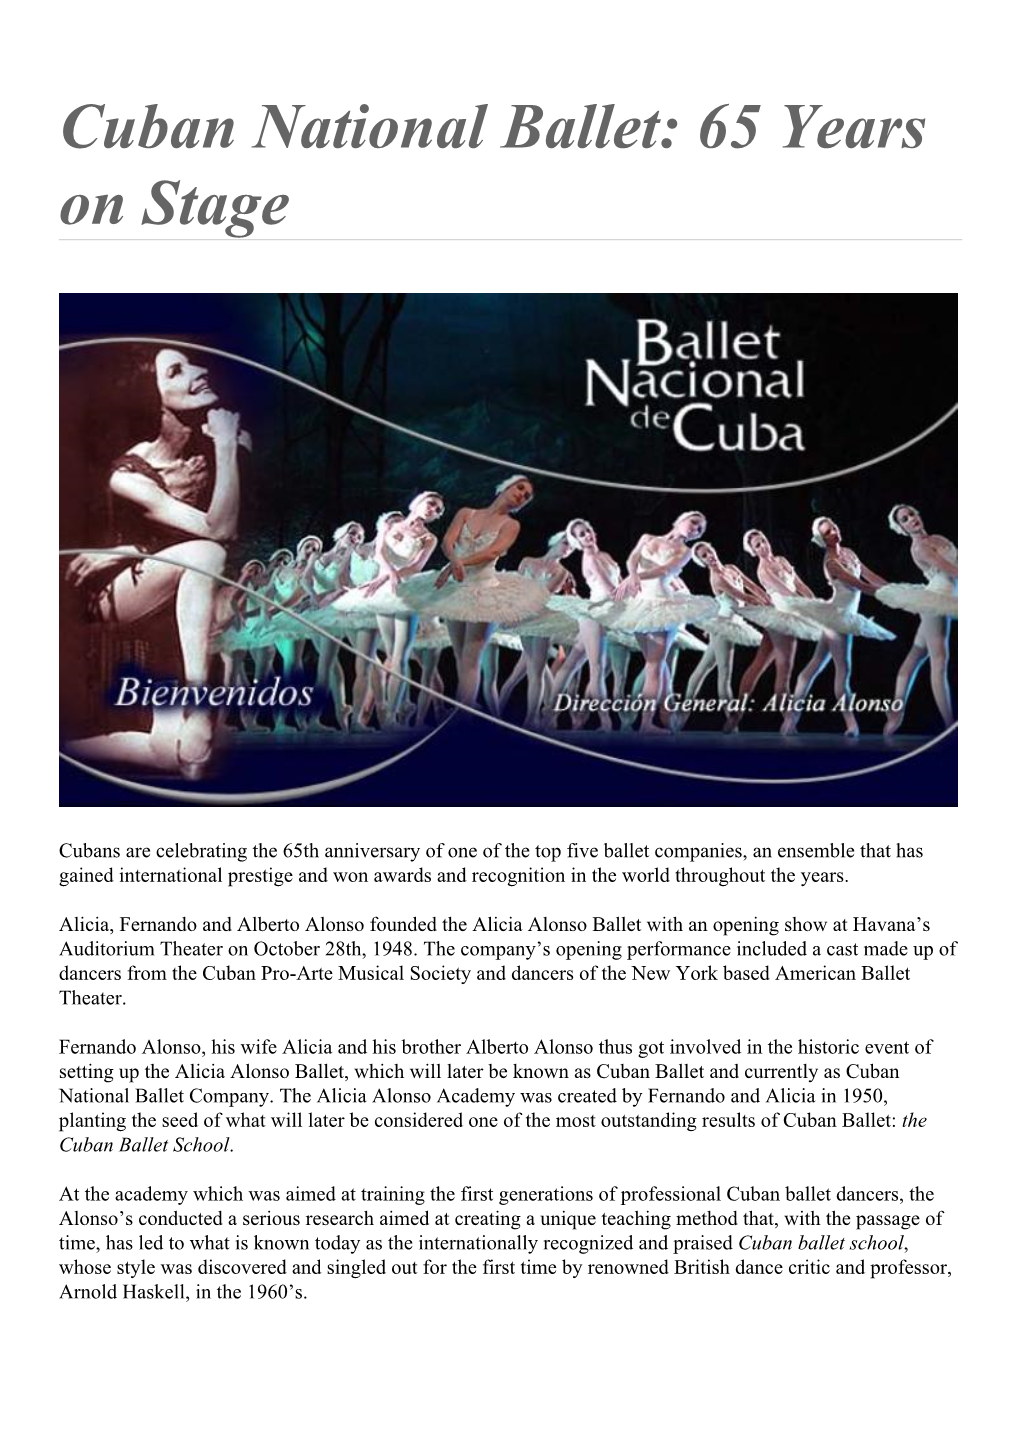 Cuban National Ballet: 65 Years on Stage